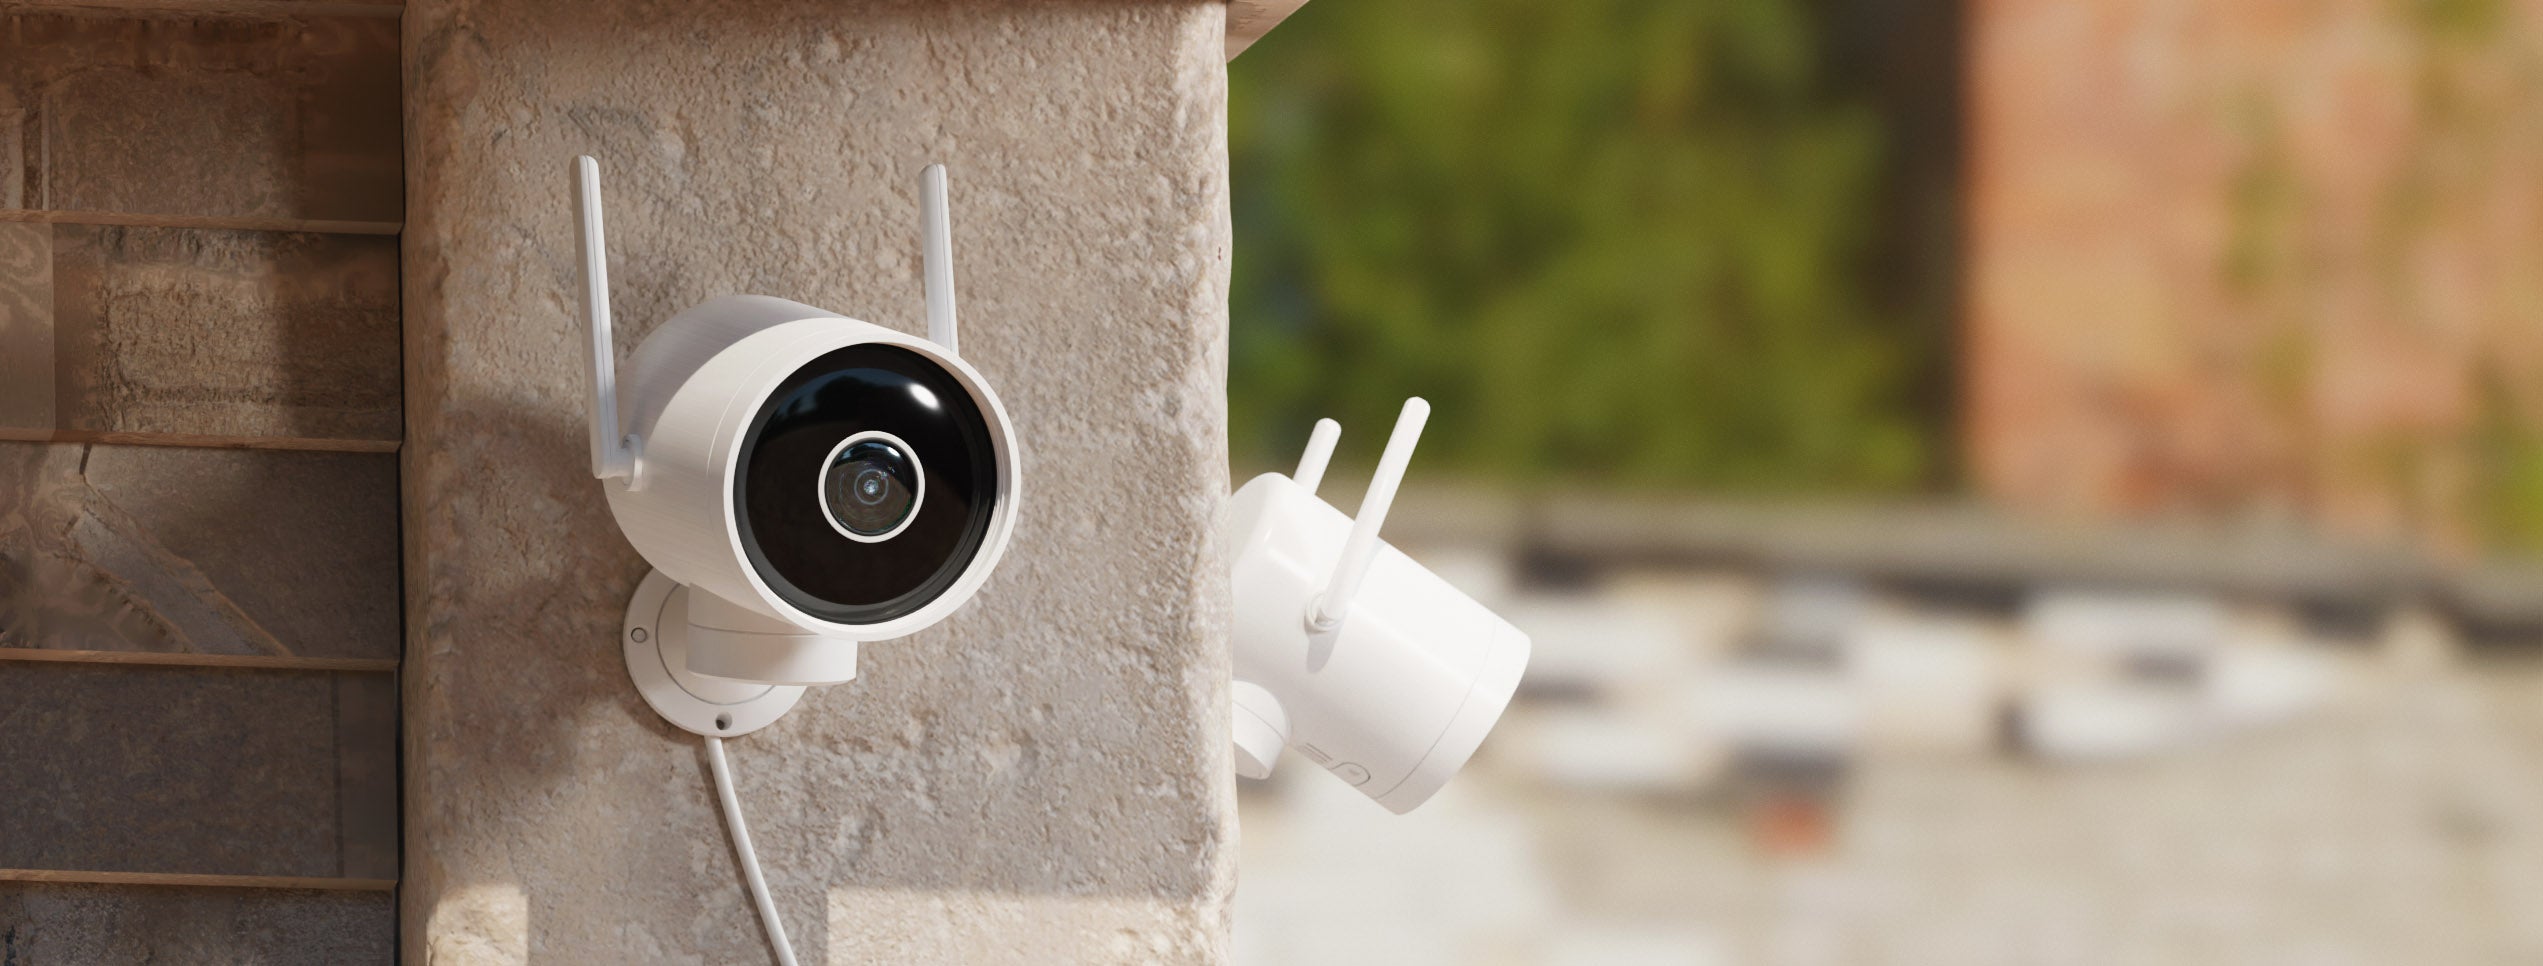 EC3-security-cameras-mounted-in-the-corner-of-a-house-concrete-wall-facing-outside